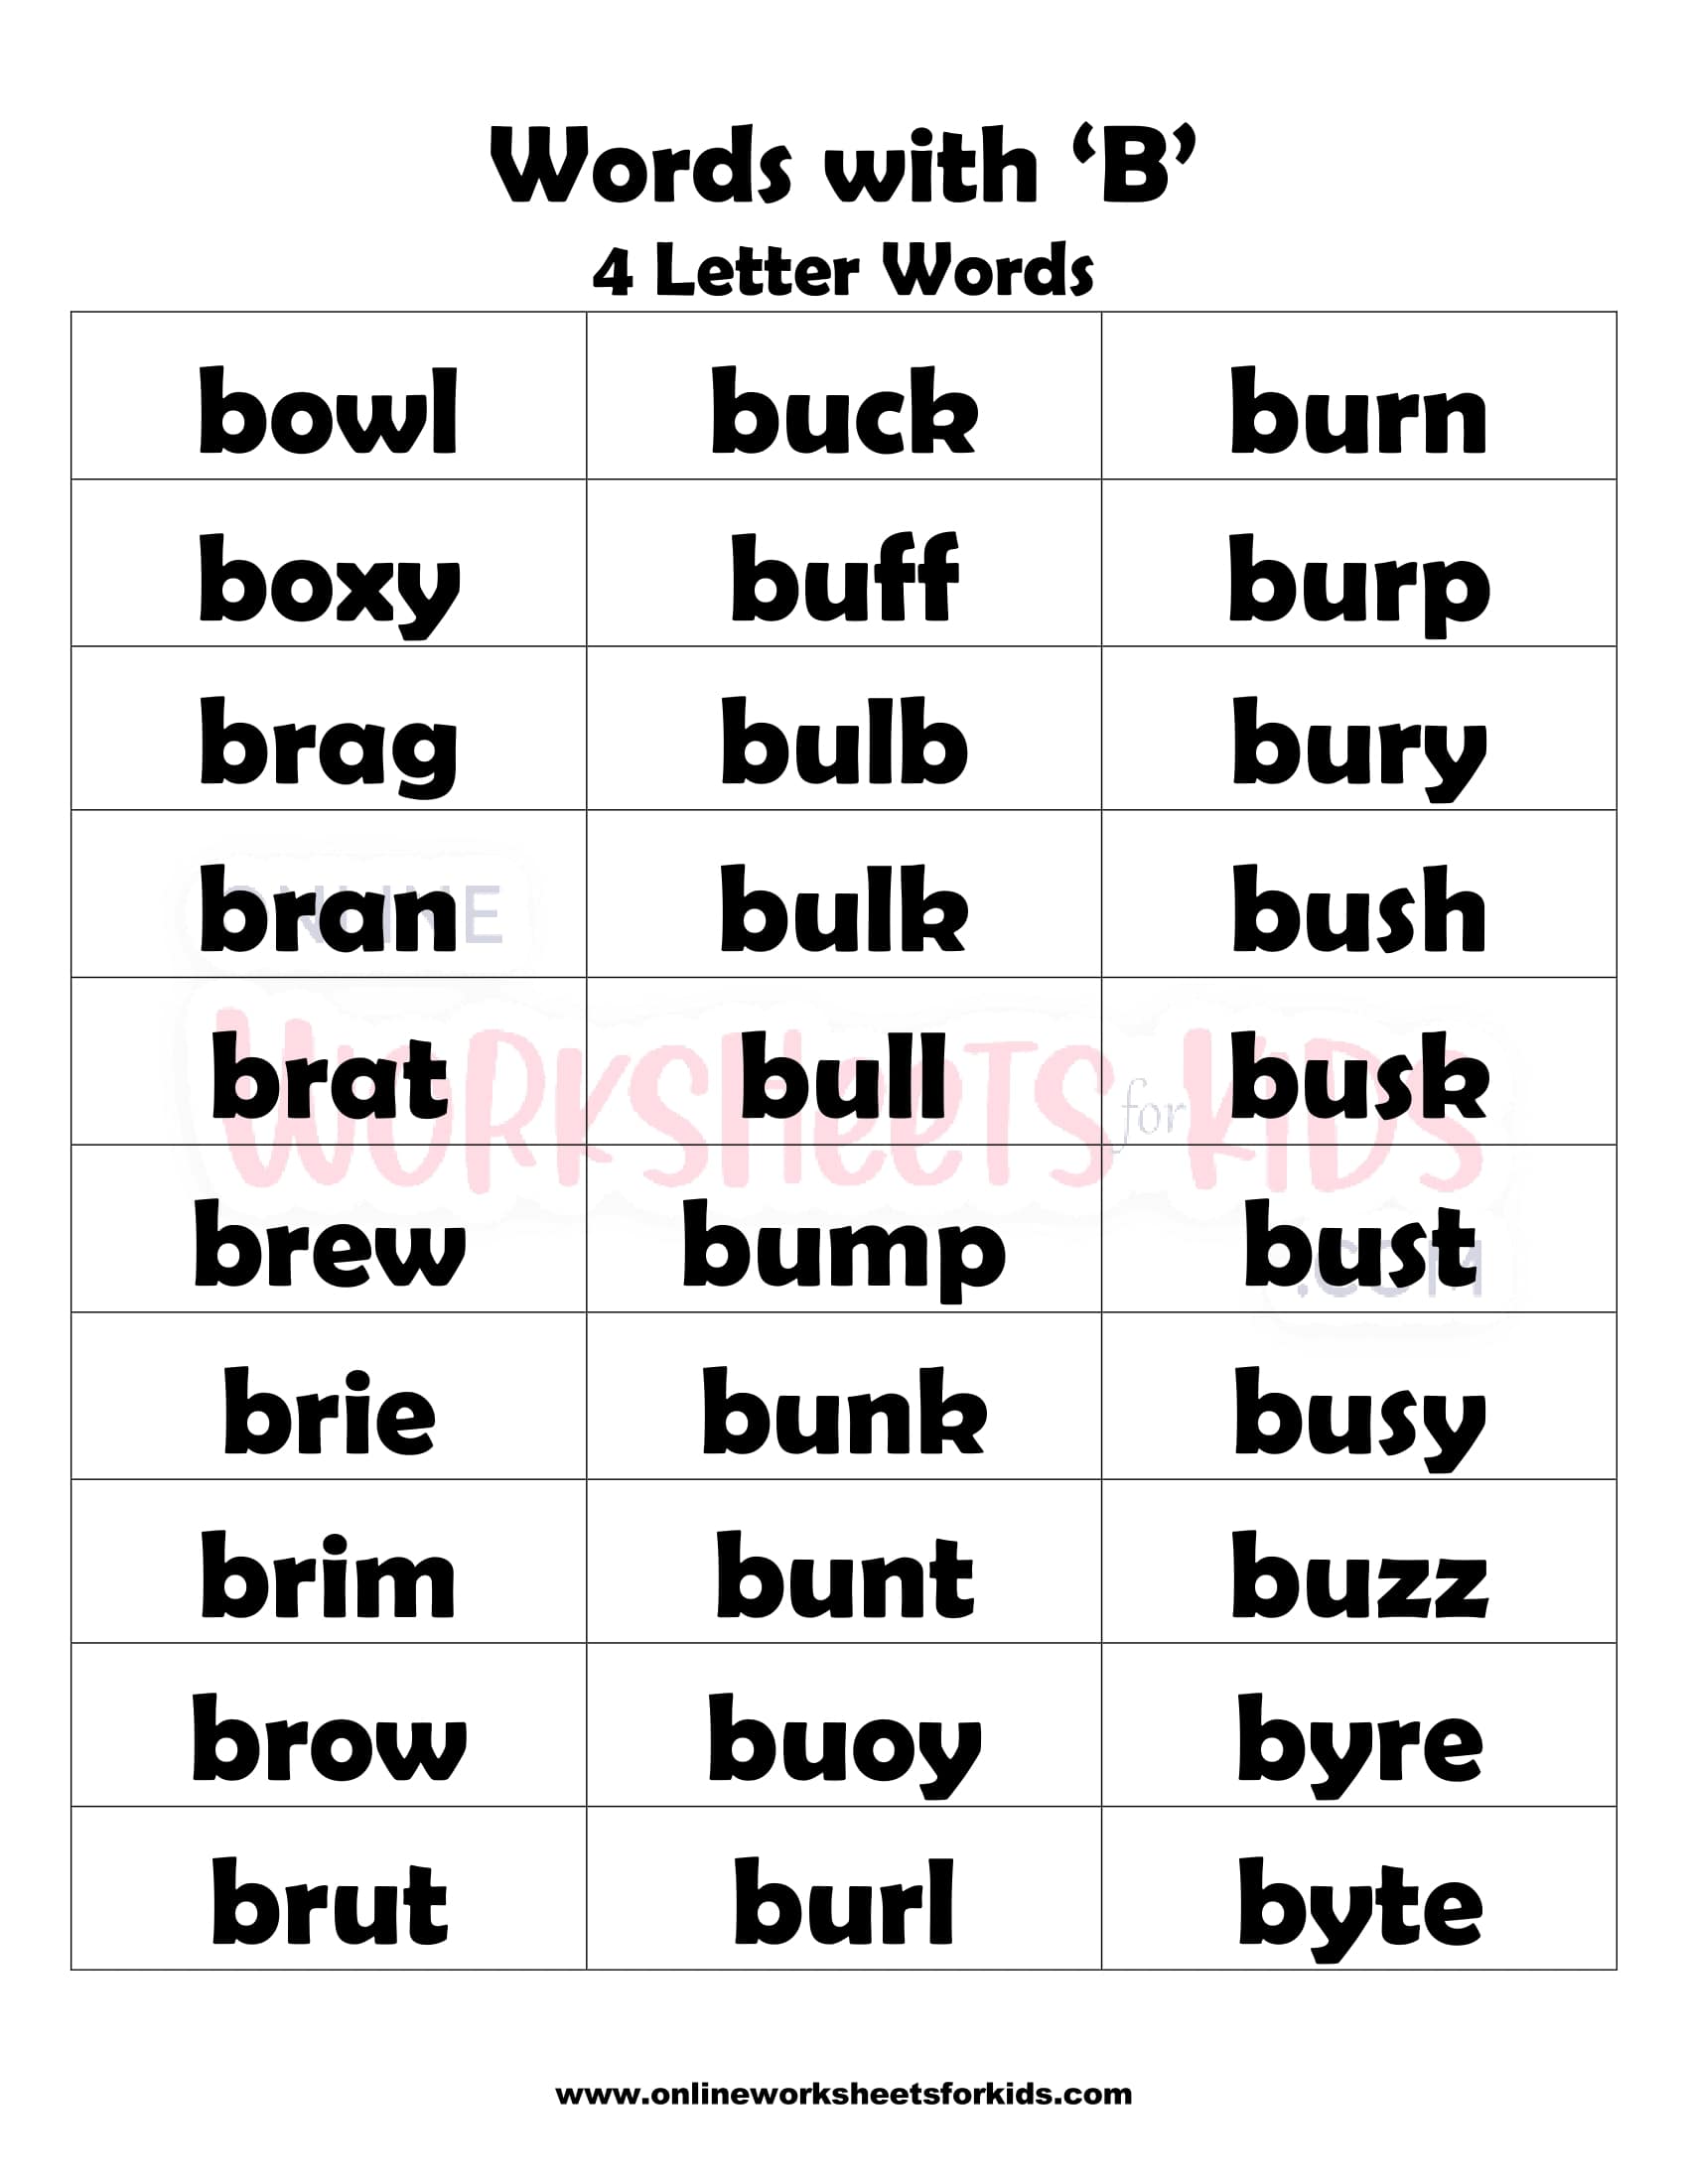 List of Words That Start With Letter 'B' For Children